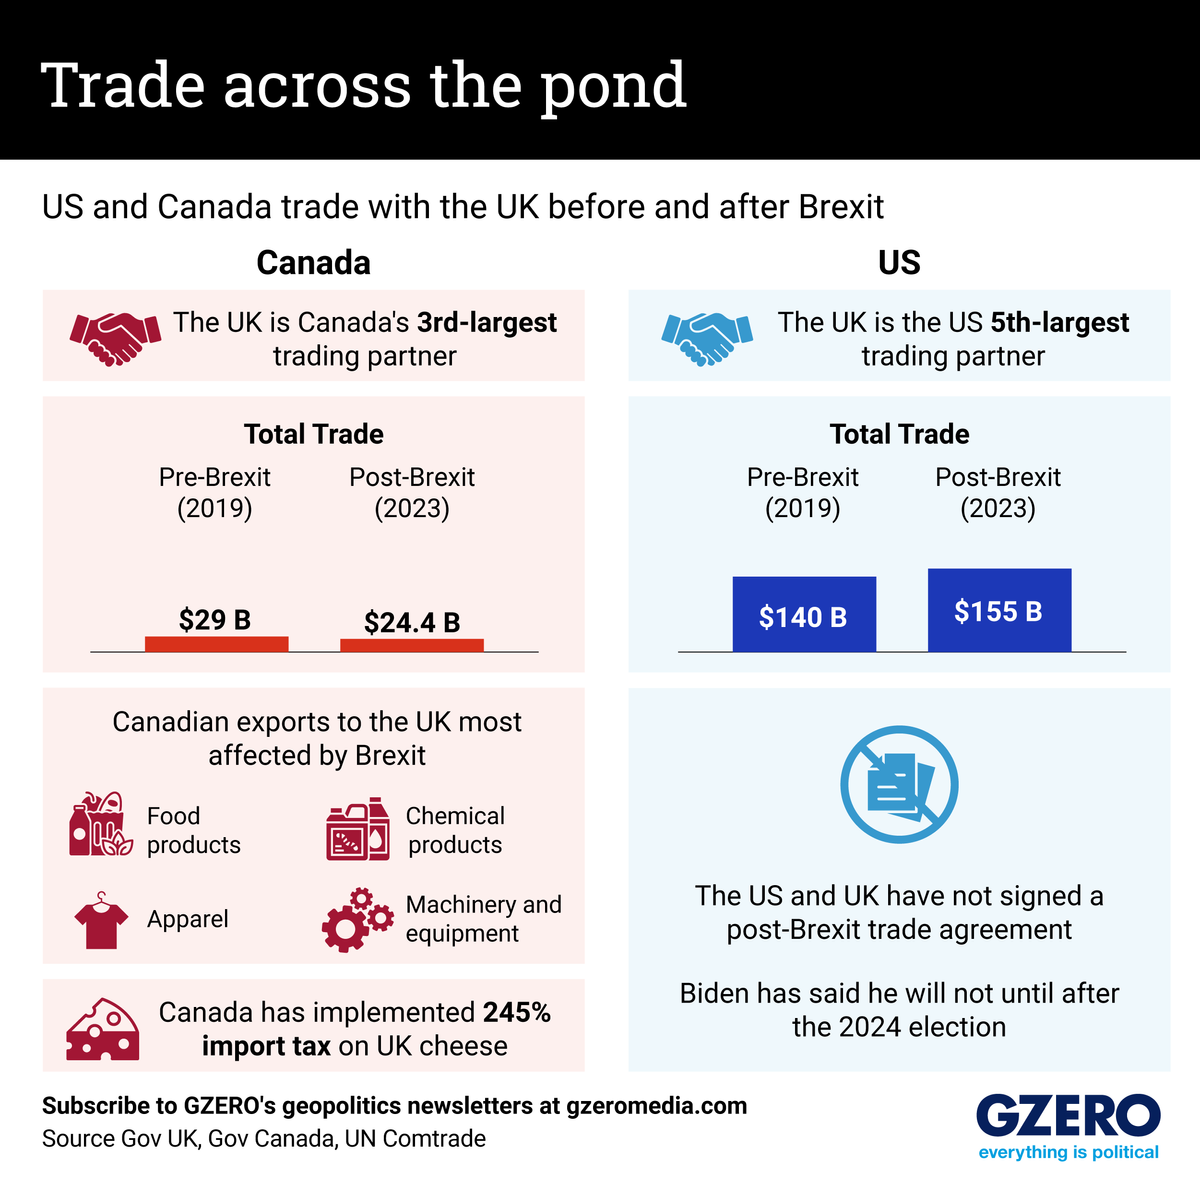 Graphic Truth: Trade across the pond